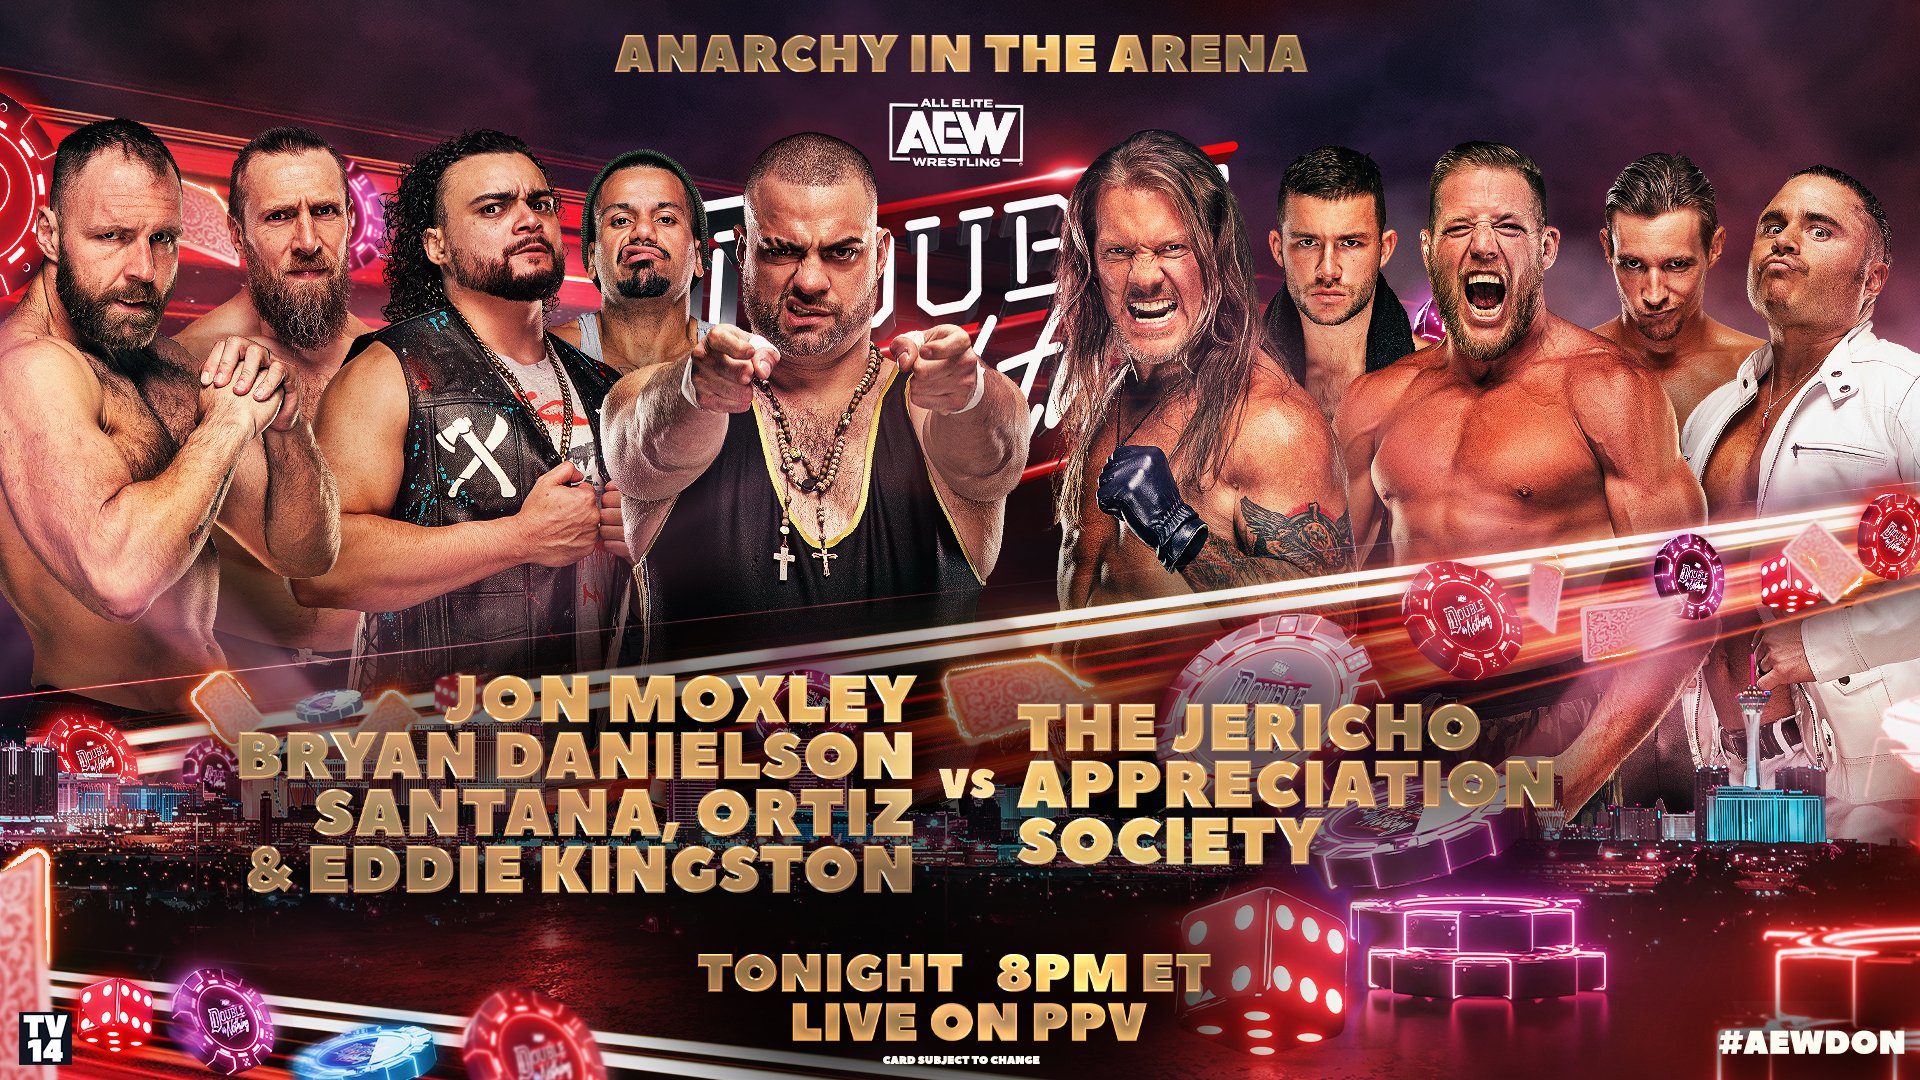 All Elite Wrestling on Twitter: "Anarchy in the Arena | #AEWDoN Double or Nothing, LIVE! Tonight on PPV ▶️ https://t.co/pmxXd6gmZc https://t.co/HXermCnxpf" / Twitter